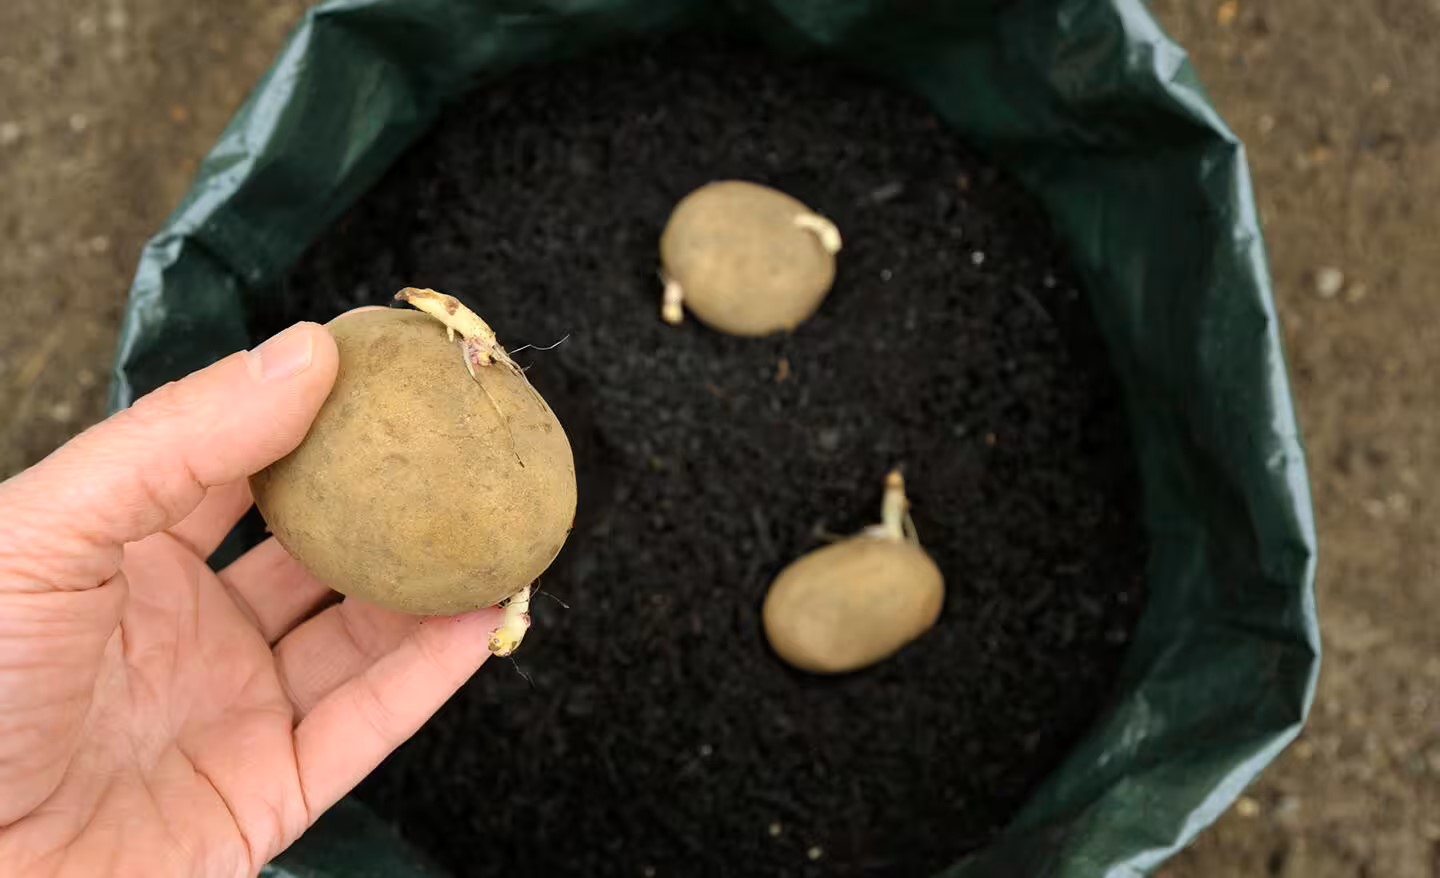 How To Plant Seed Potatoes In Grow Bags